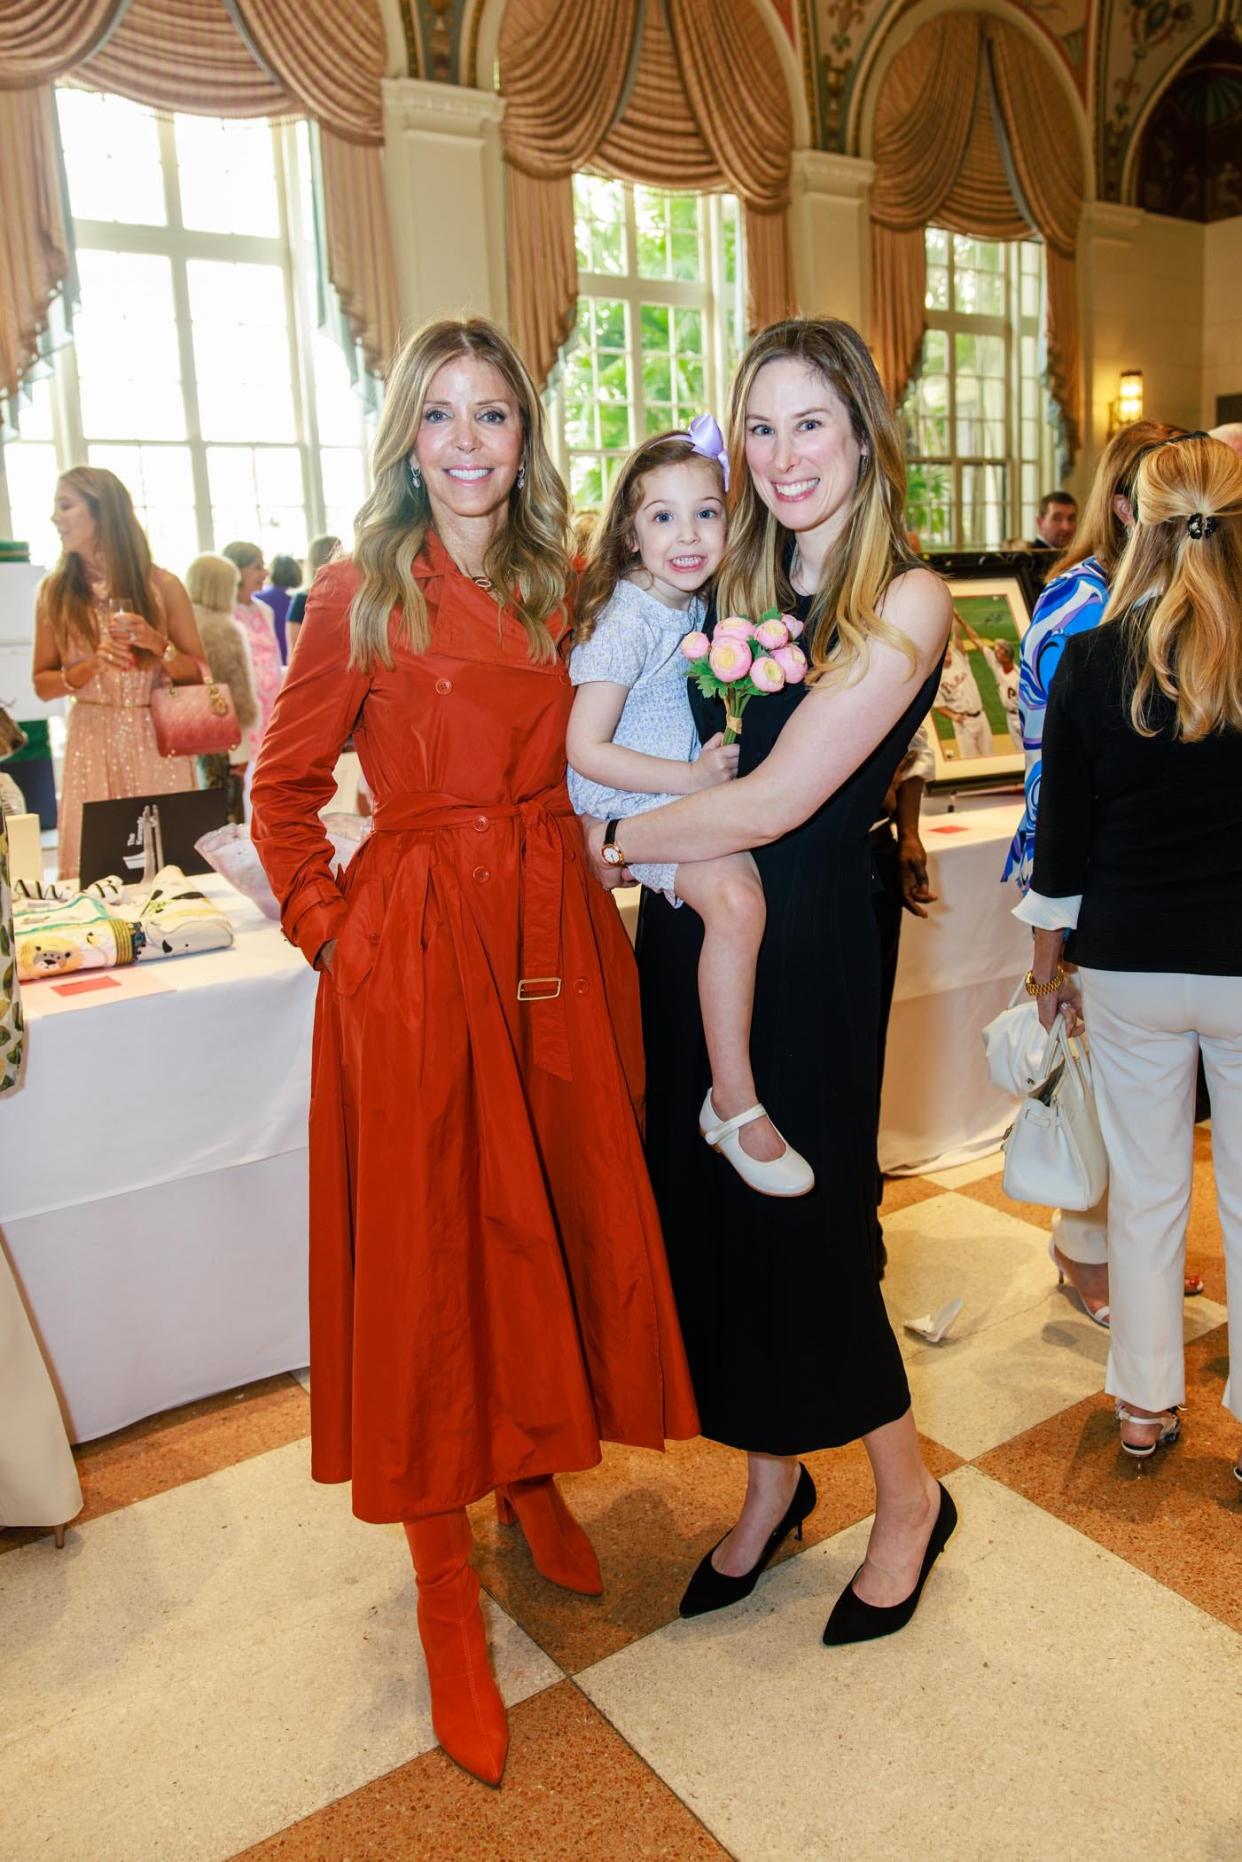 Merrill Fisher Gottesman, Eleanor Kaufman and Caroline Kaufman at the Richard David Kann Melanoma (RDK) Foundation luncheon and fashion show at The Breakers in March 2023. This year's foundation luncheon is set for Feb. 26 at the Breakers.